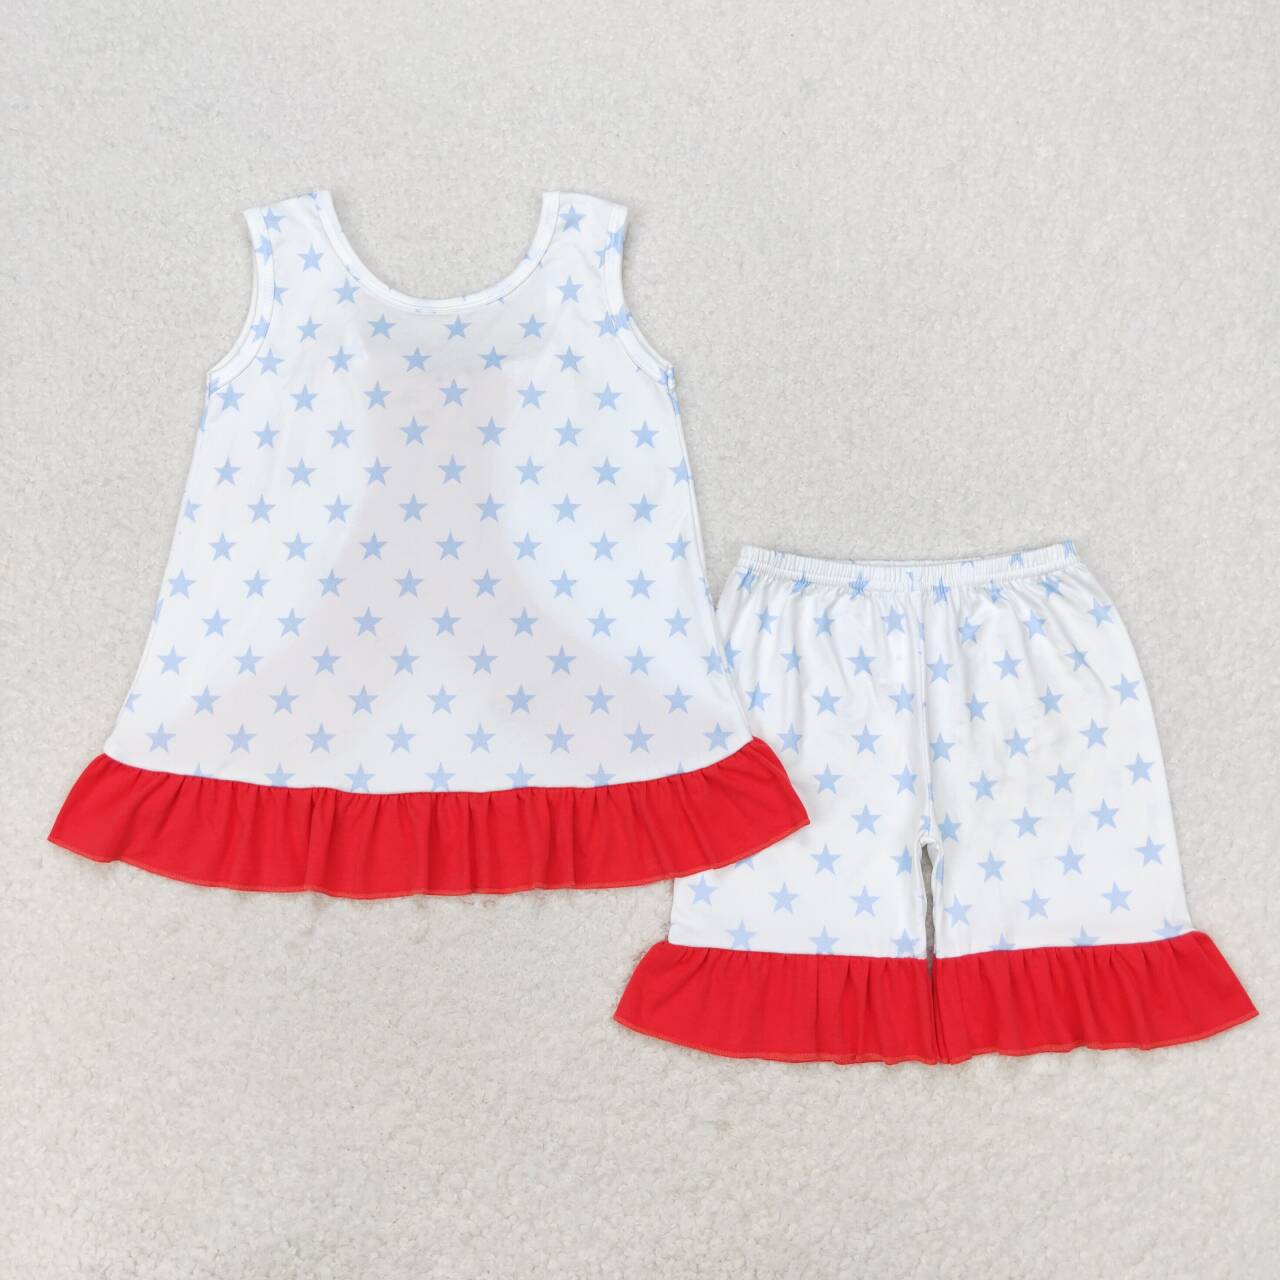 Baby Girls Summer  Stars Top Ruffle Shorts Outfit